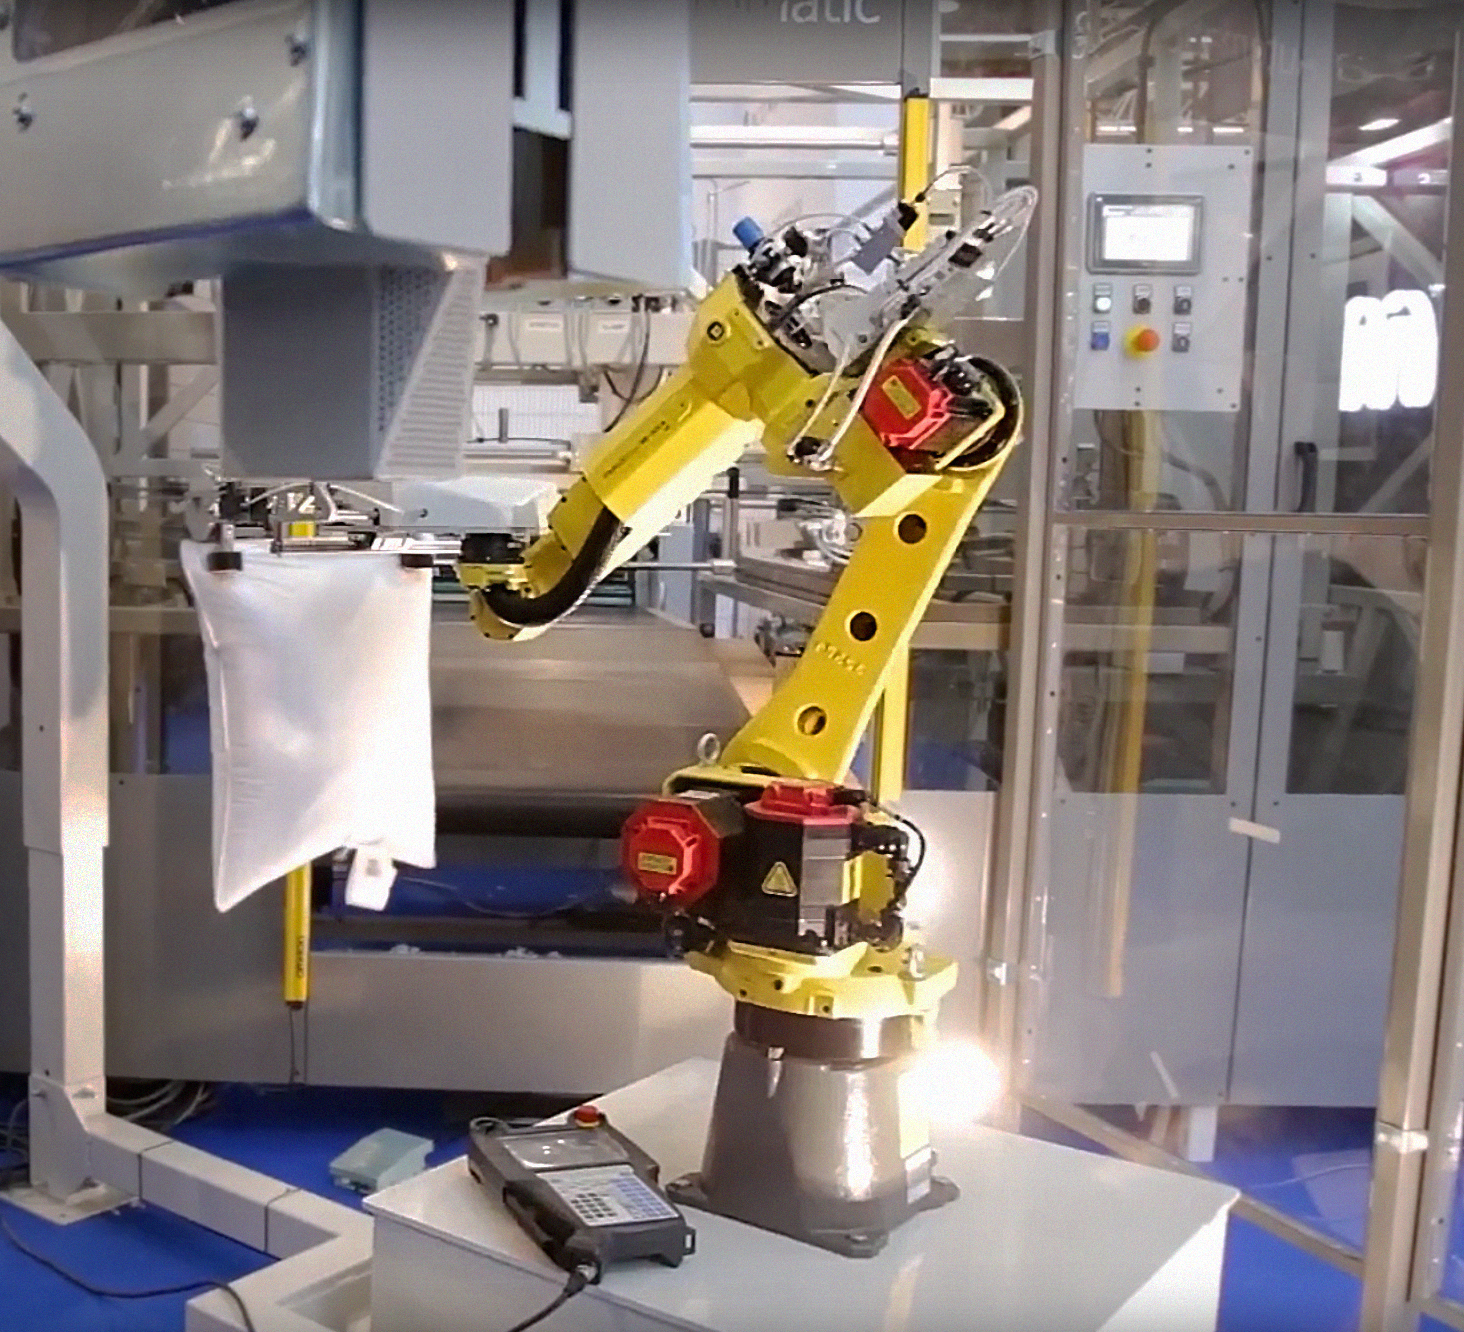 Robotic pillow-making system from ACG Kinna Automatic. © ACG Kinna